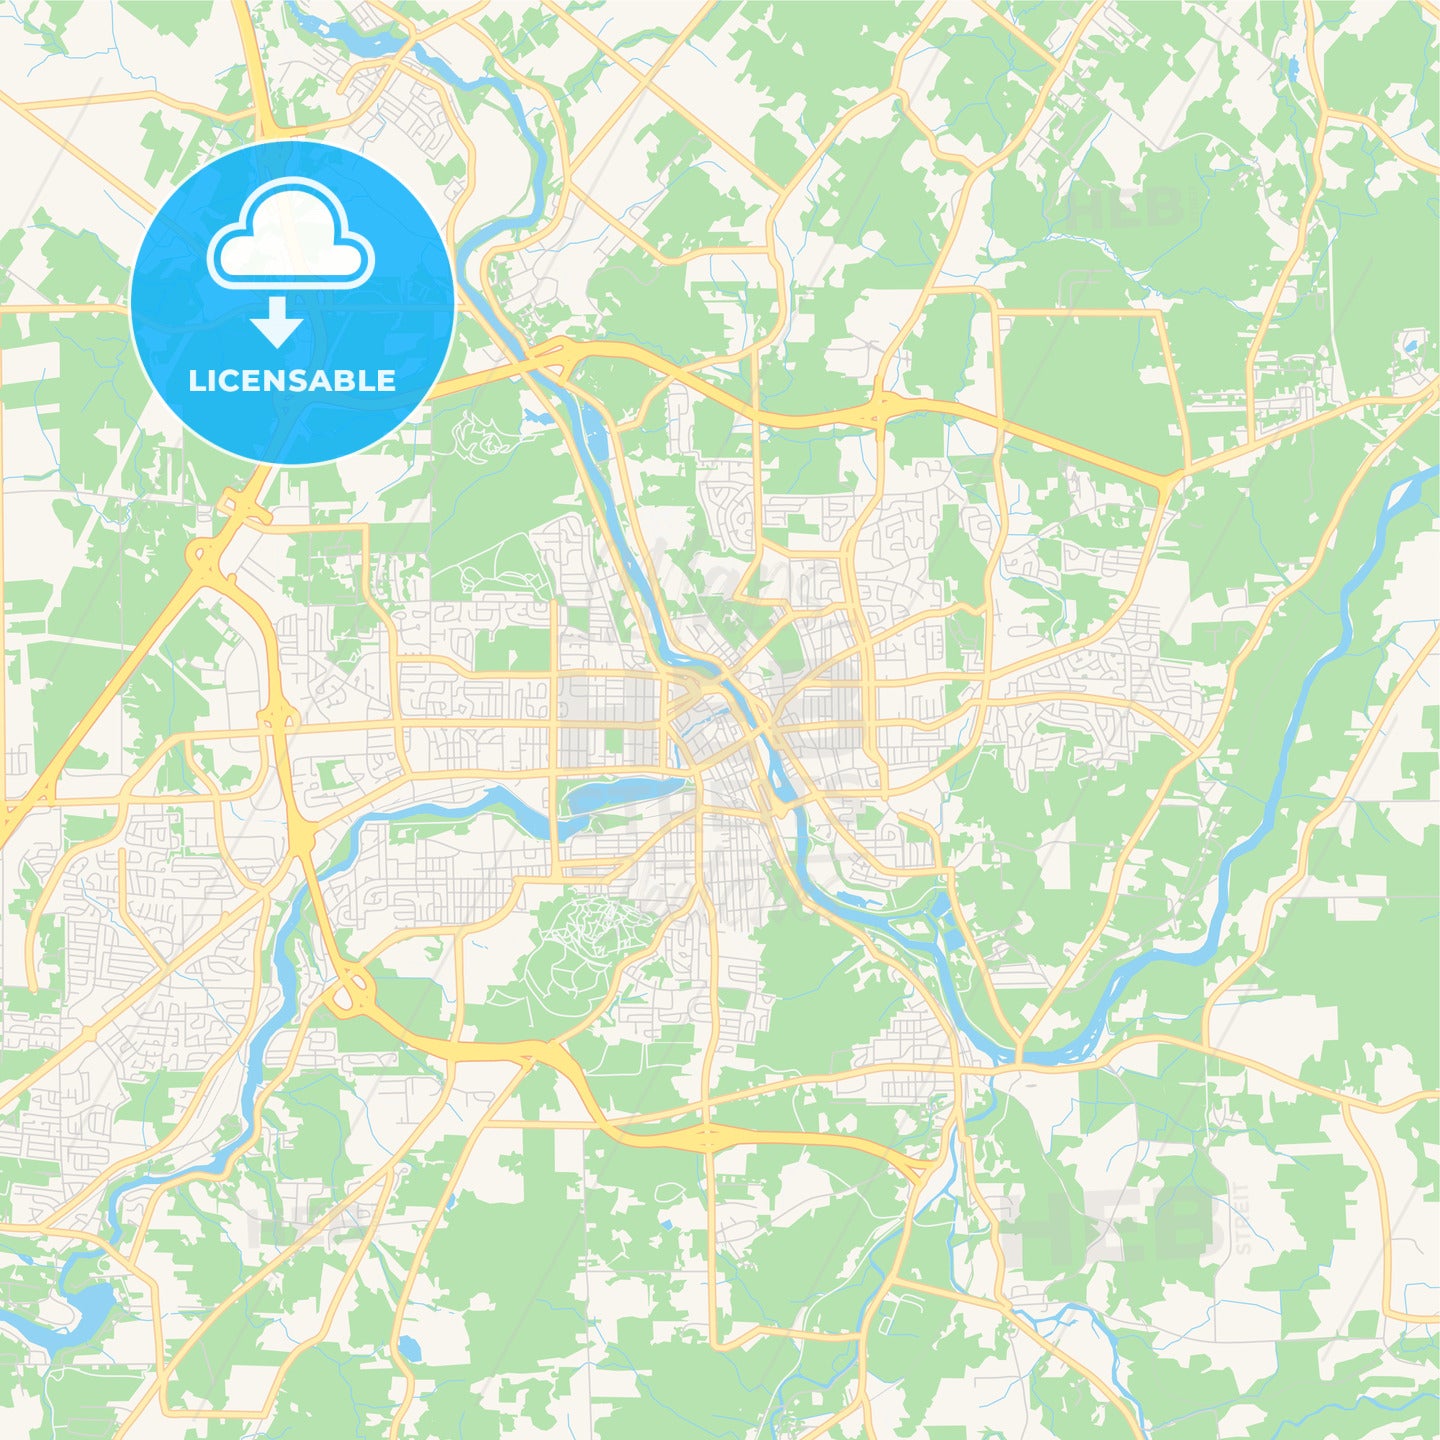 Empty vector map of Sherbrooke, Quebec, Canada